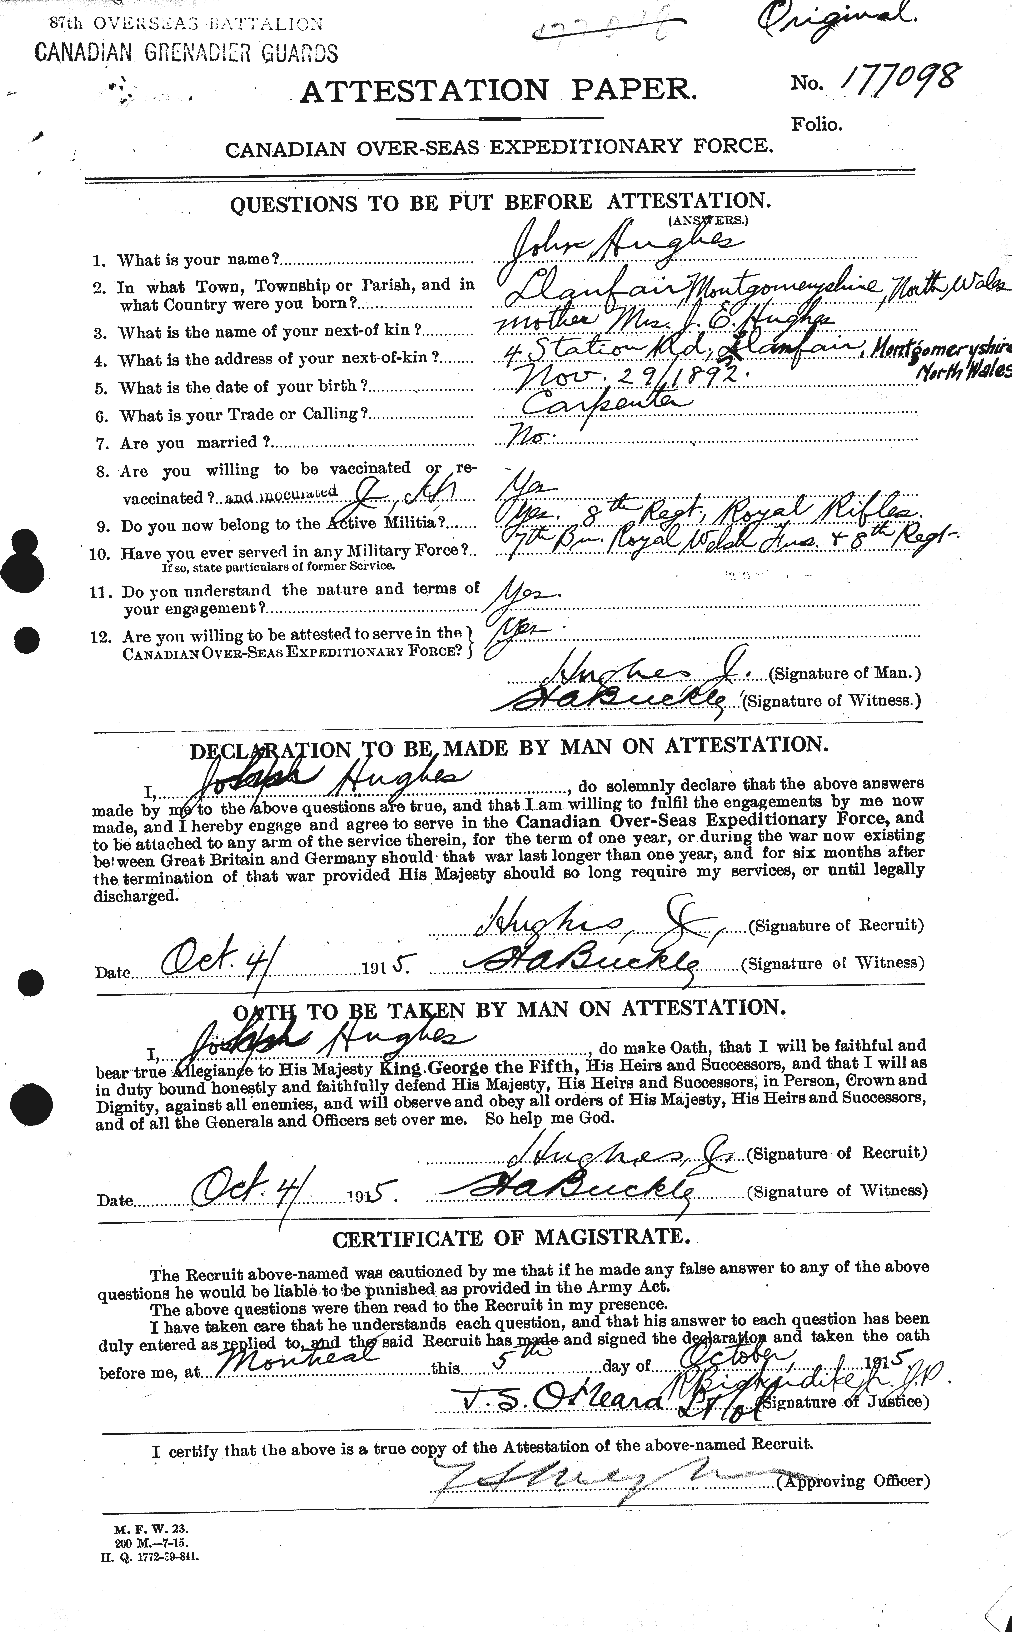 Personnel Records of the First World War - CEF 403993a